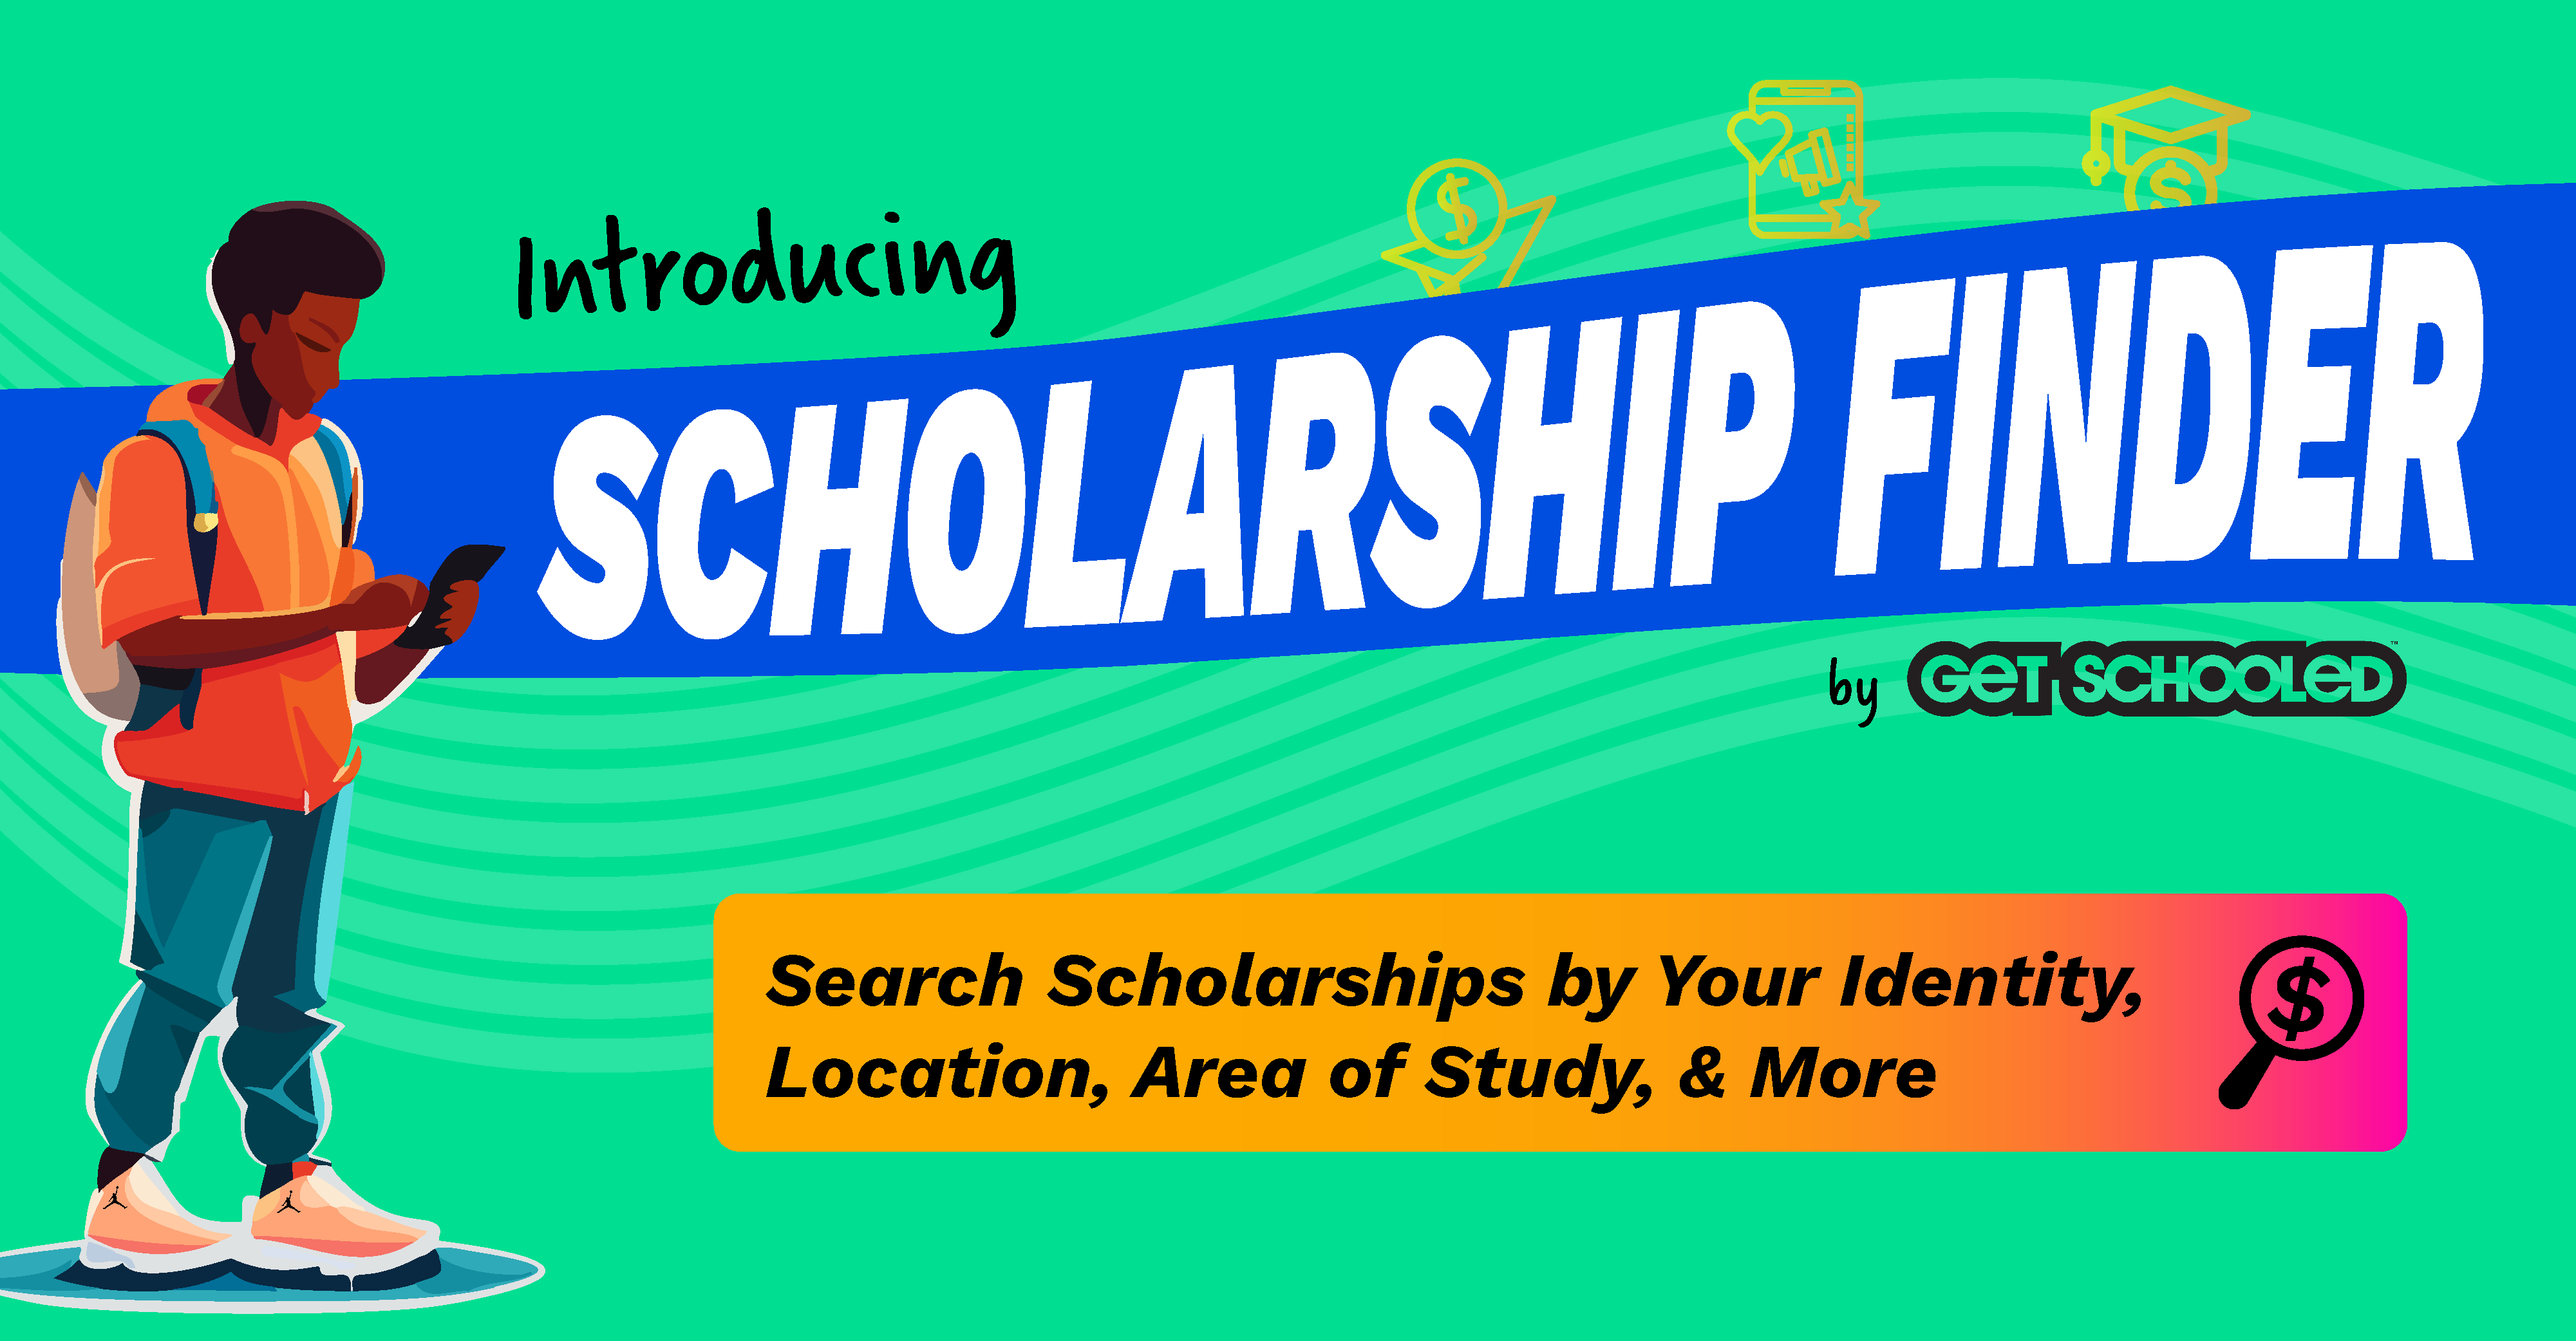 Illustration of a student (cartoon vector) with a backpack, gazing at their phone. The banner promotes the Get Schooled scholarship finder, stating, "Explore the Scholarship Finder by GET SCHOOLED: Discover Opportunities Based on Your Identity, Location, Area of Study, & More." - Scholarships for Student Athletes